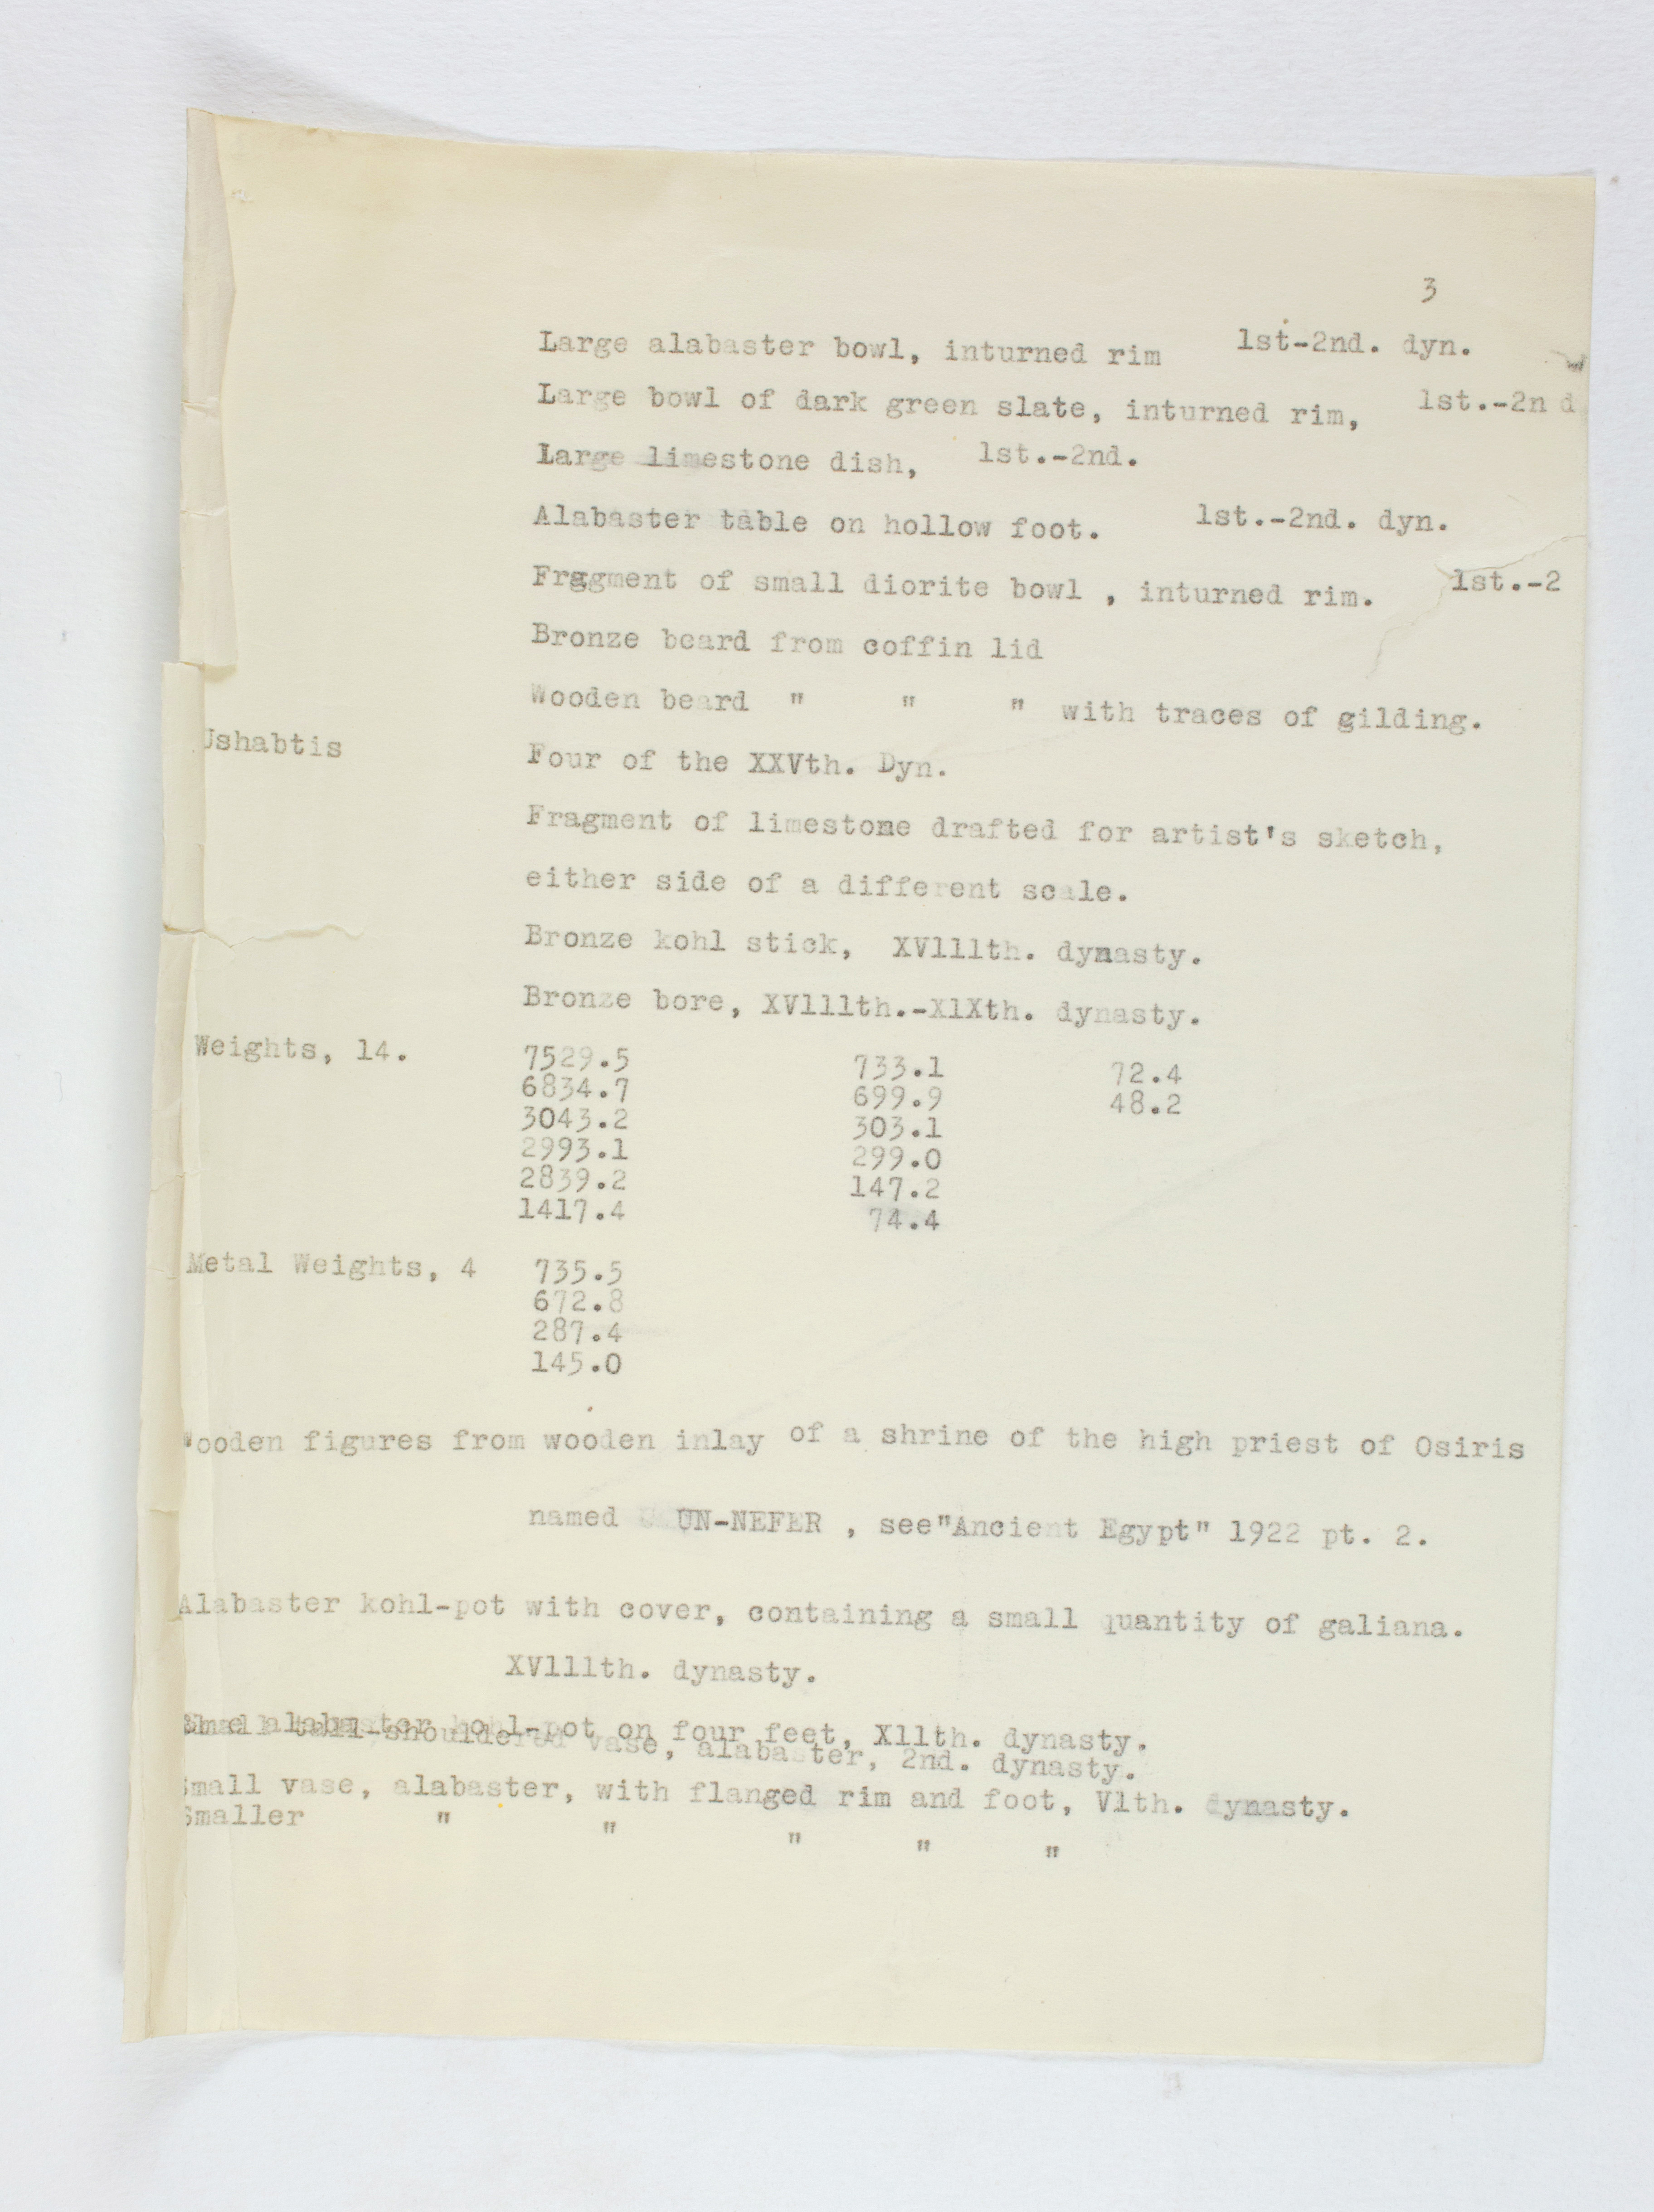 1926-27 Secondary distribution from UCL Individual institution list PMA/WFP1/D/30/13.3